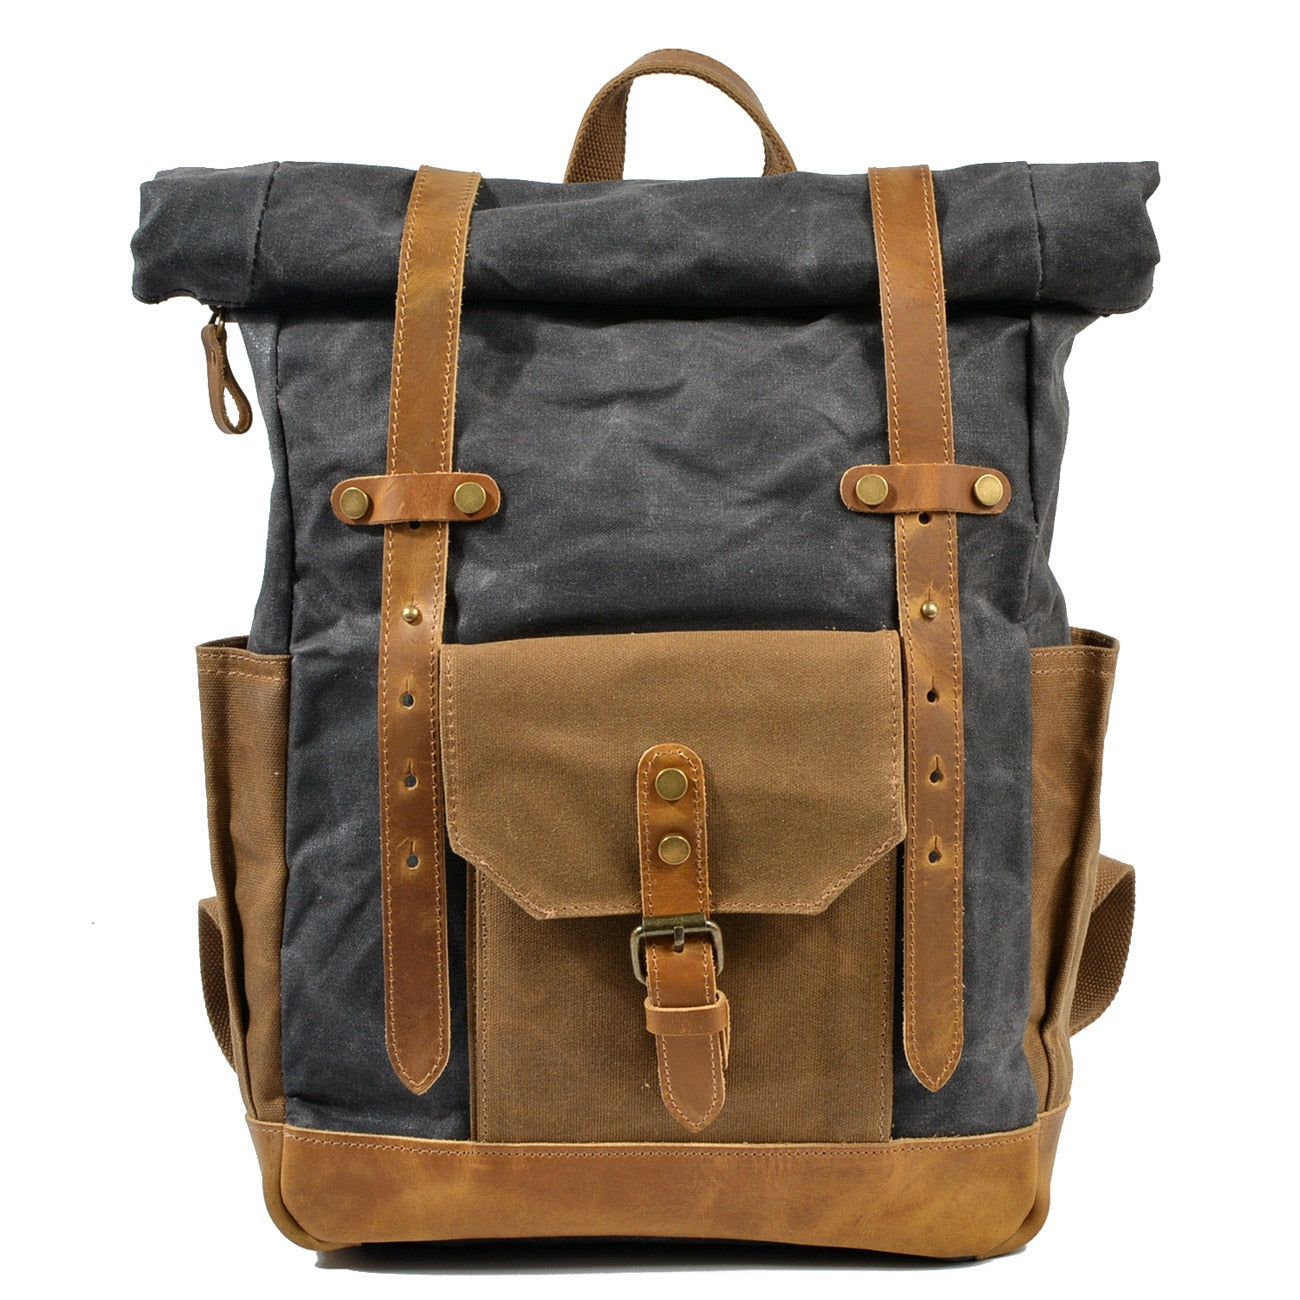 MUCHUAN Luxury Vintage Canvas Backpacks for Men Oil Wax Canvas Leather Travel Backpack Large Waterproof Daypacks Retro Bagpack PAP SHOP 42